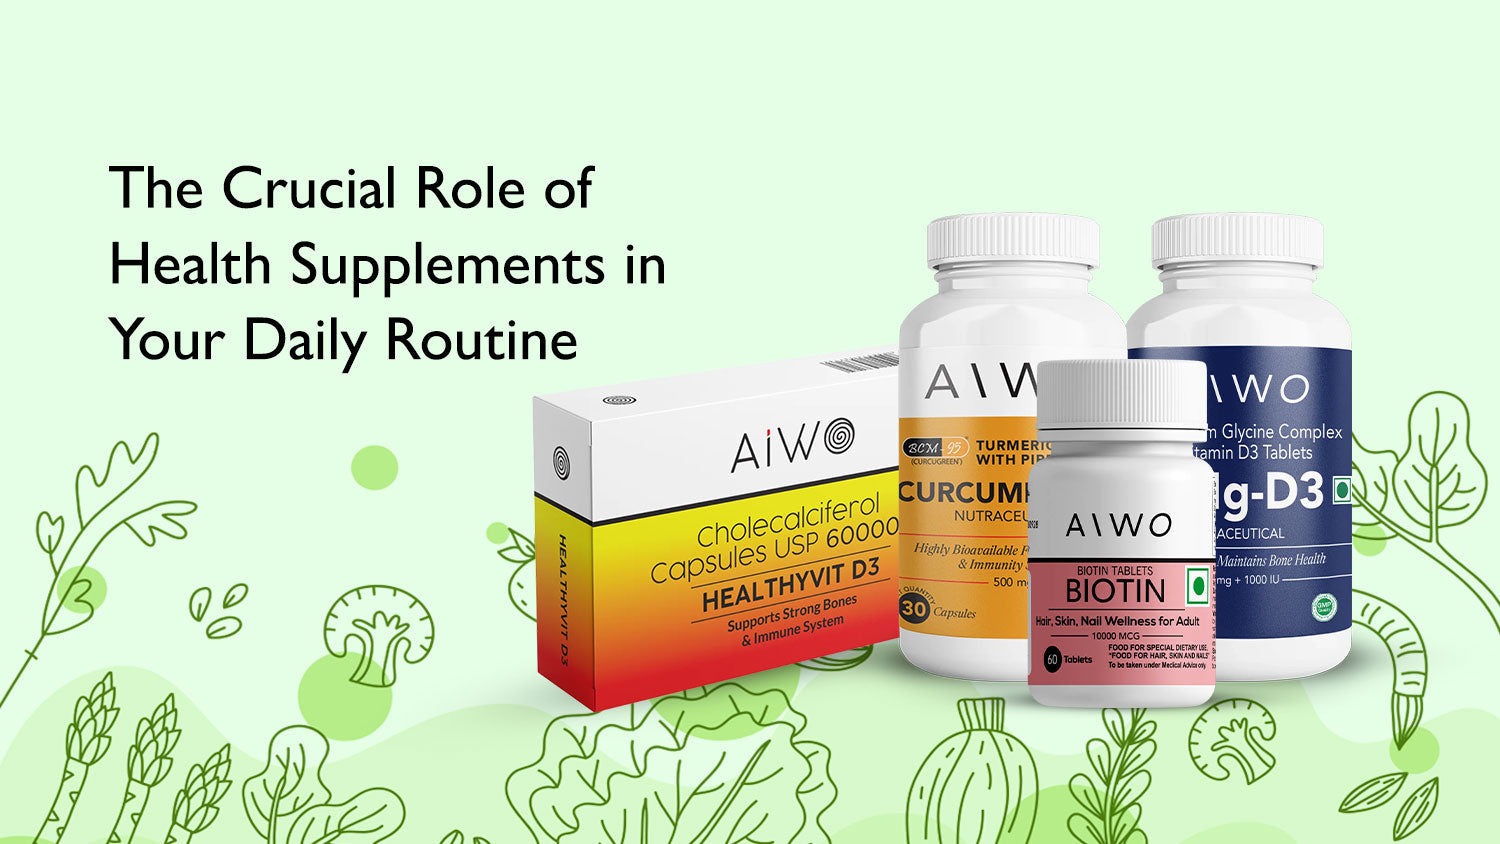 Optimizing Wellness: The crucial role of health supplements in your daily routine